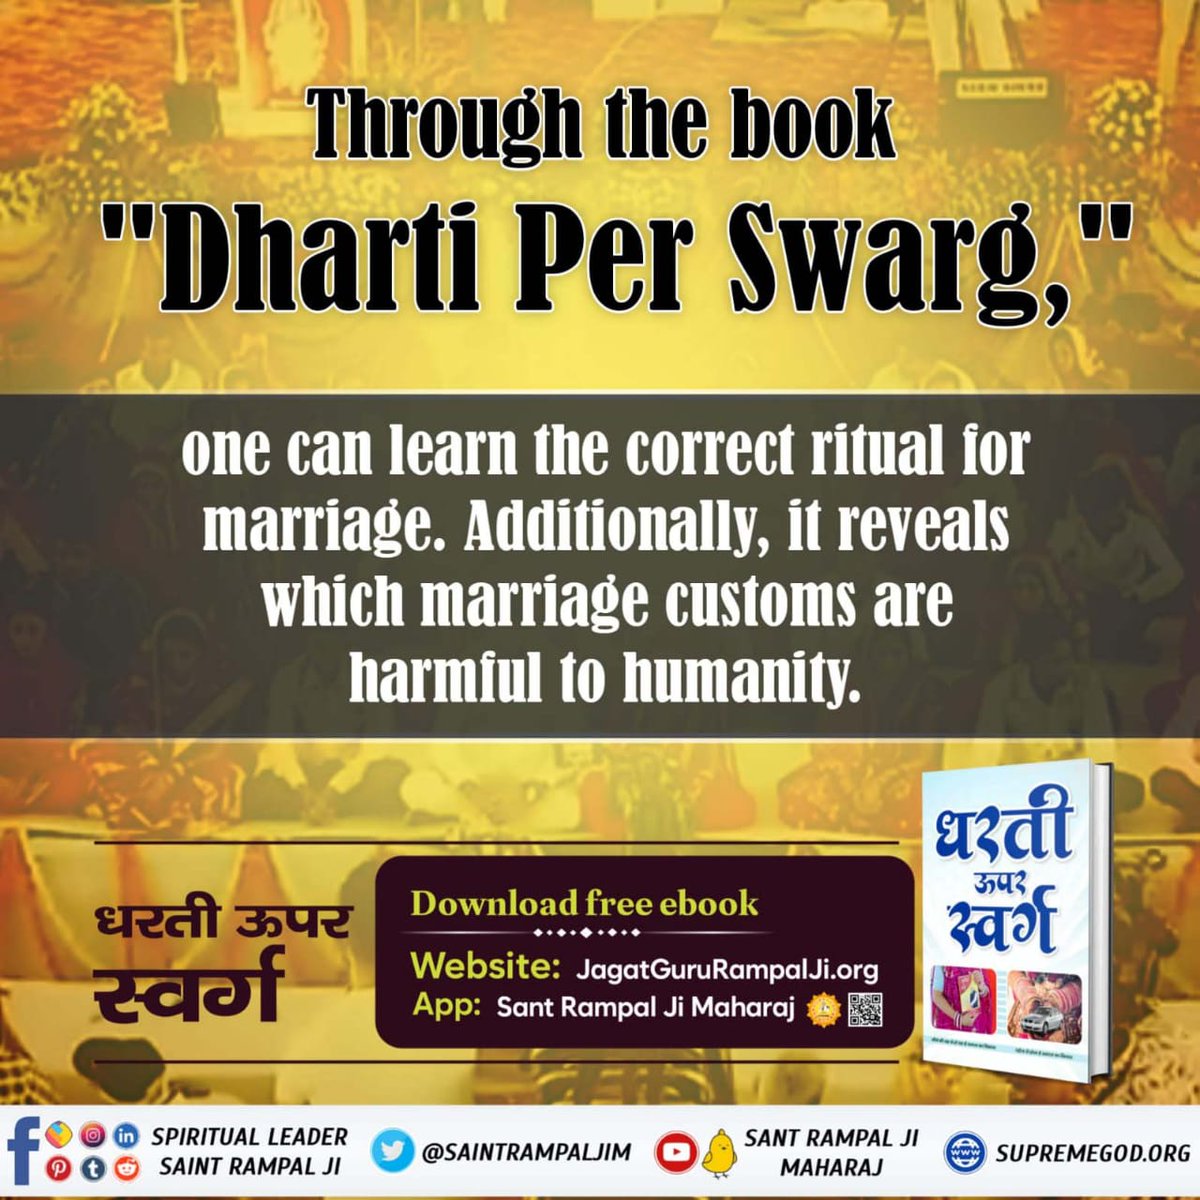 #GodMorningSaturday
Through the book 
'DHARTI UPAR SWARG,'
one can learn the correct ritual for marriage. Additionally, it reveals which marriage customs are harmful to humanity.
#धरती_को_स्वर्ग_बनाना_है